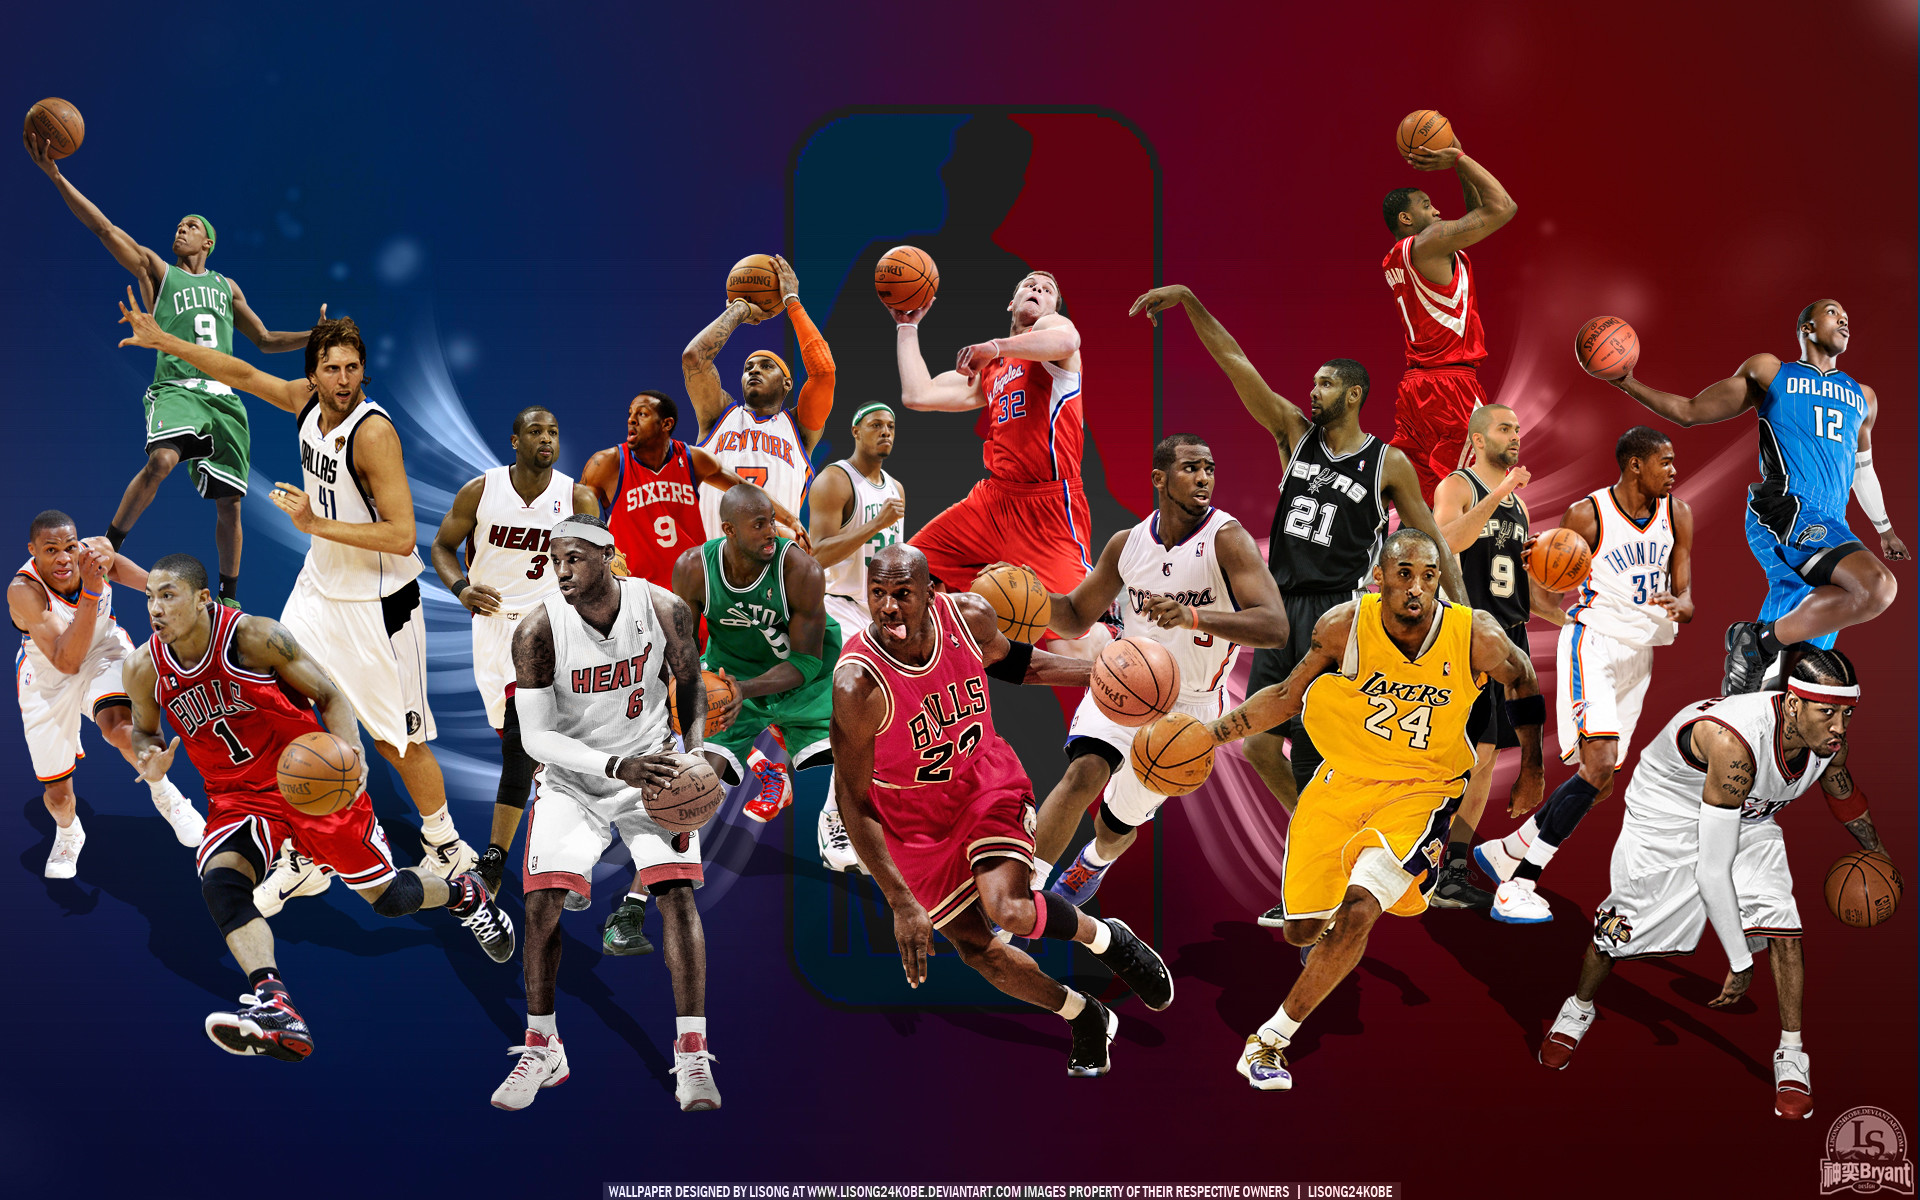 Cool Basketball Wallpaper For iPhone Image